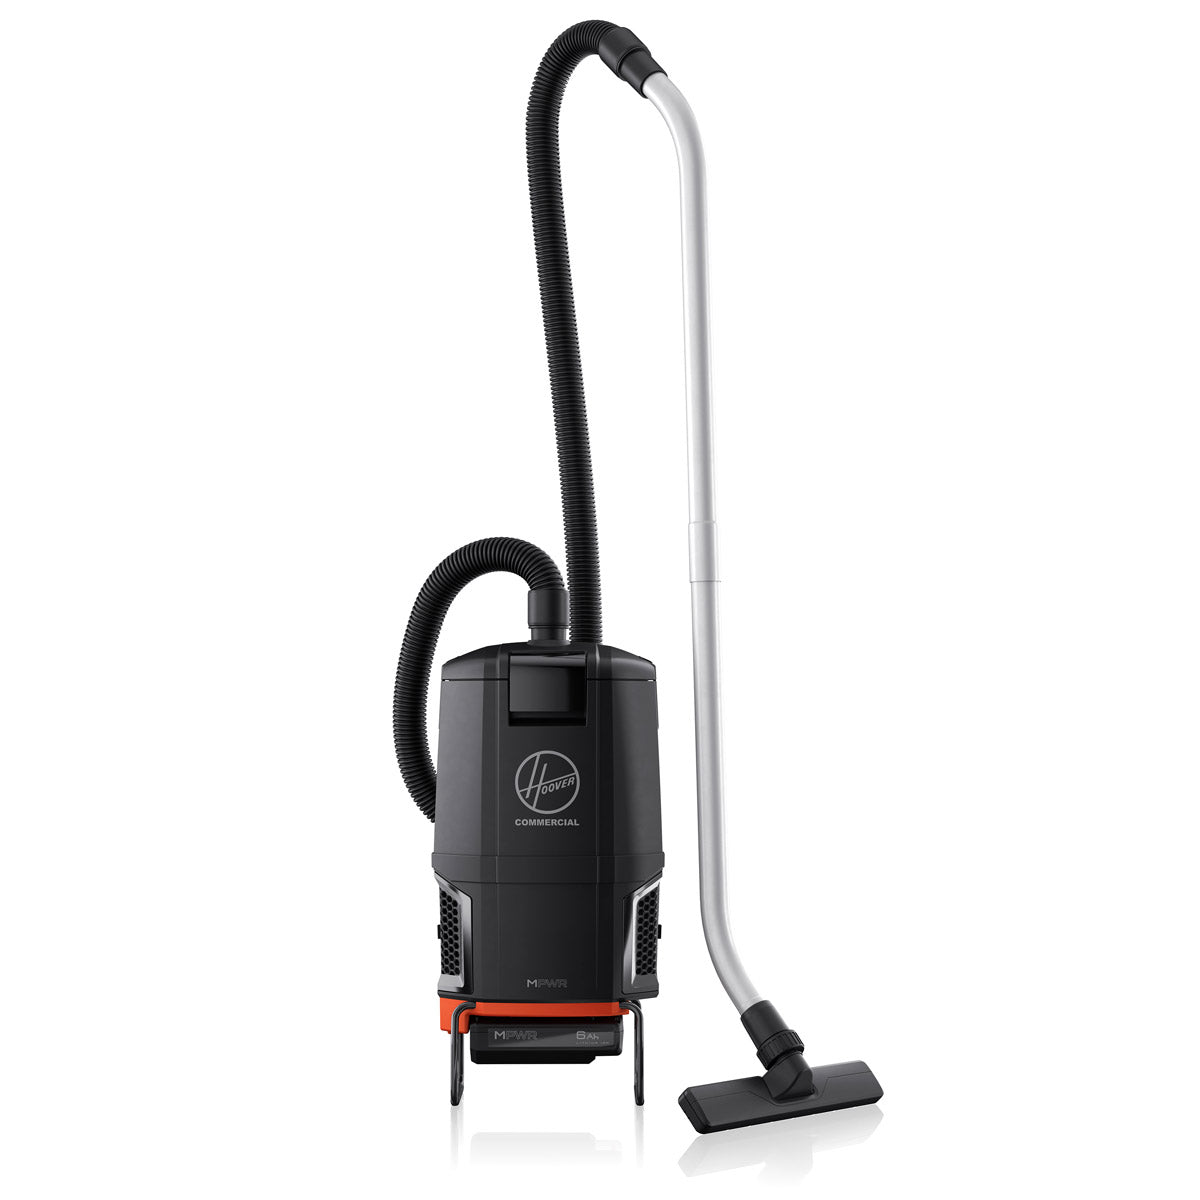 Lave vaisselle Inverter Hoover 16 Couverts HF6B4S1PX Inox - SpaceNet